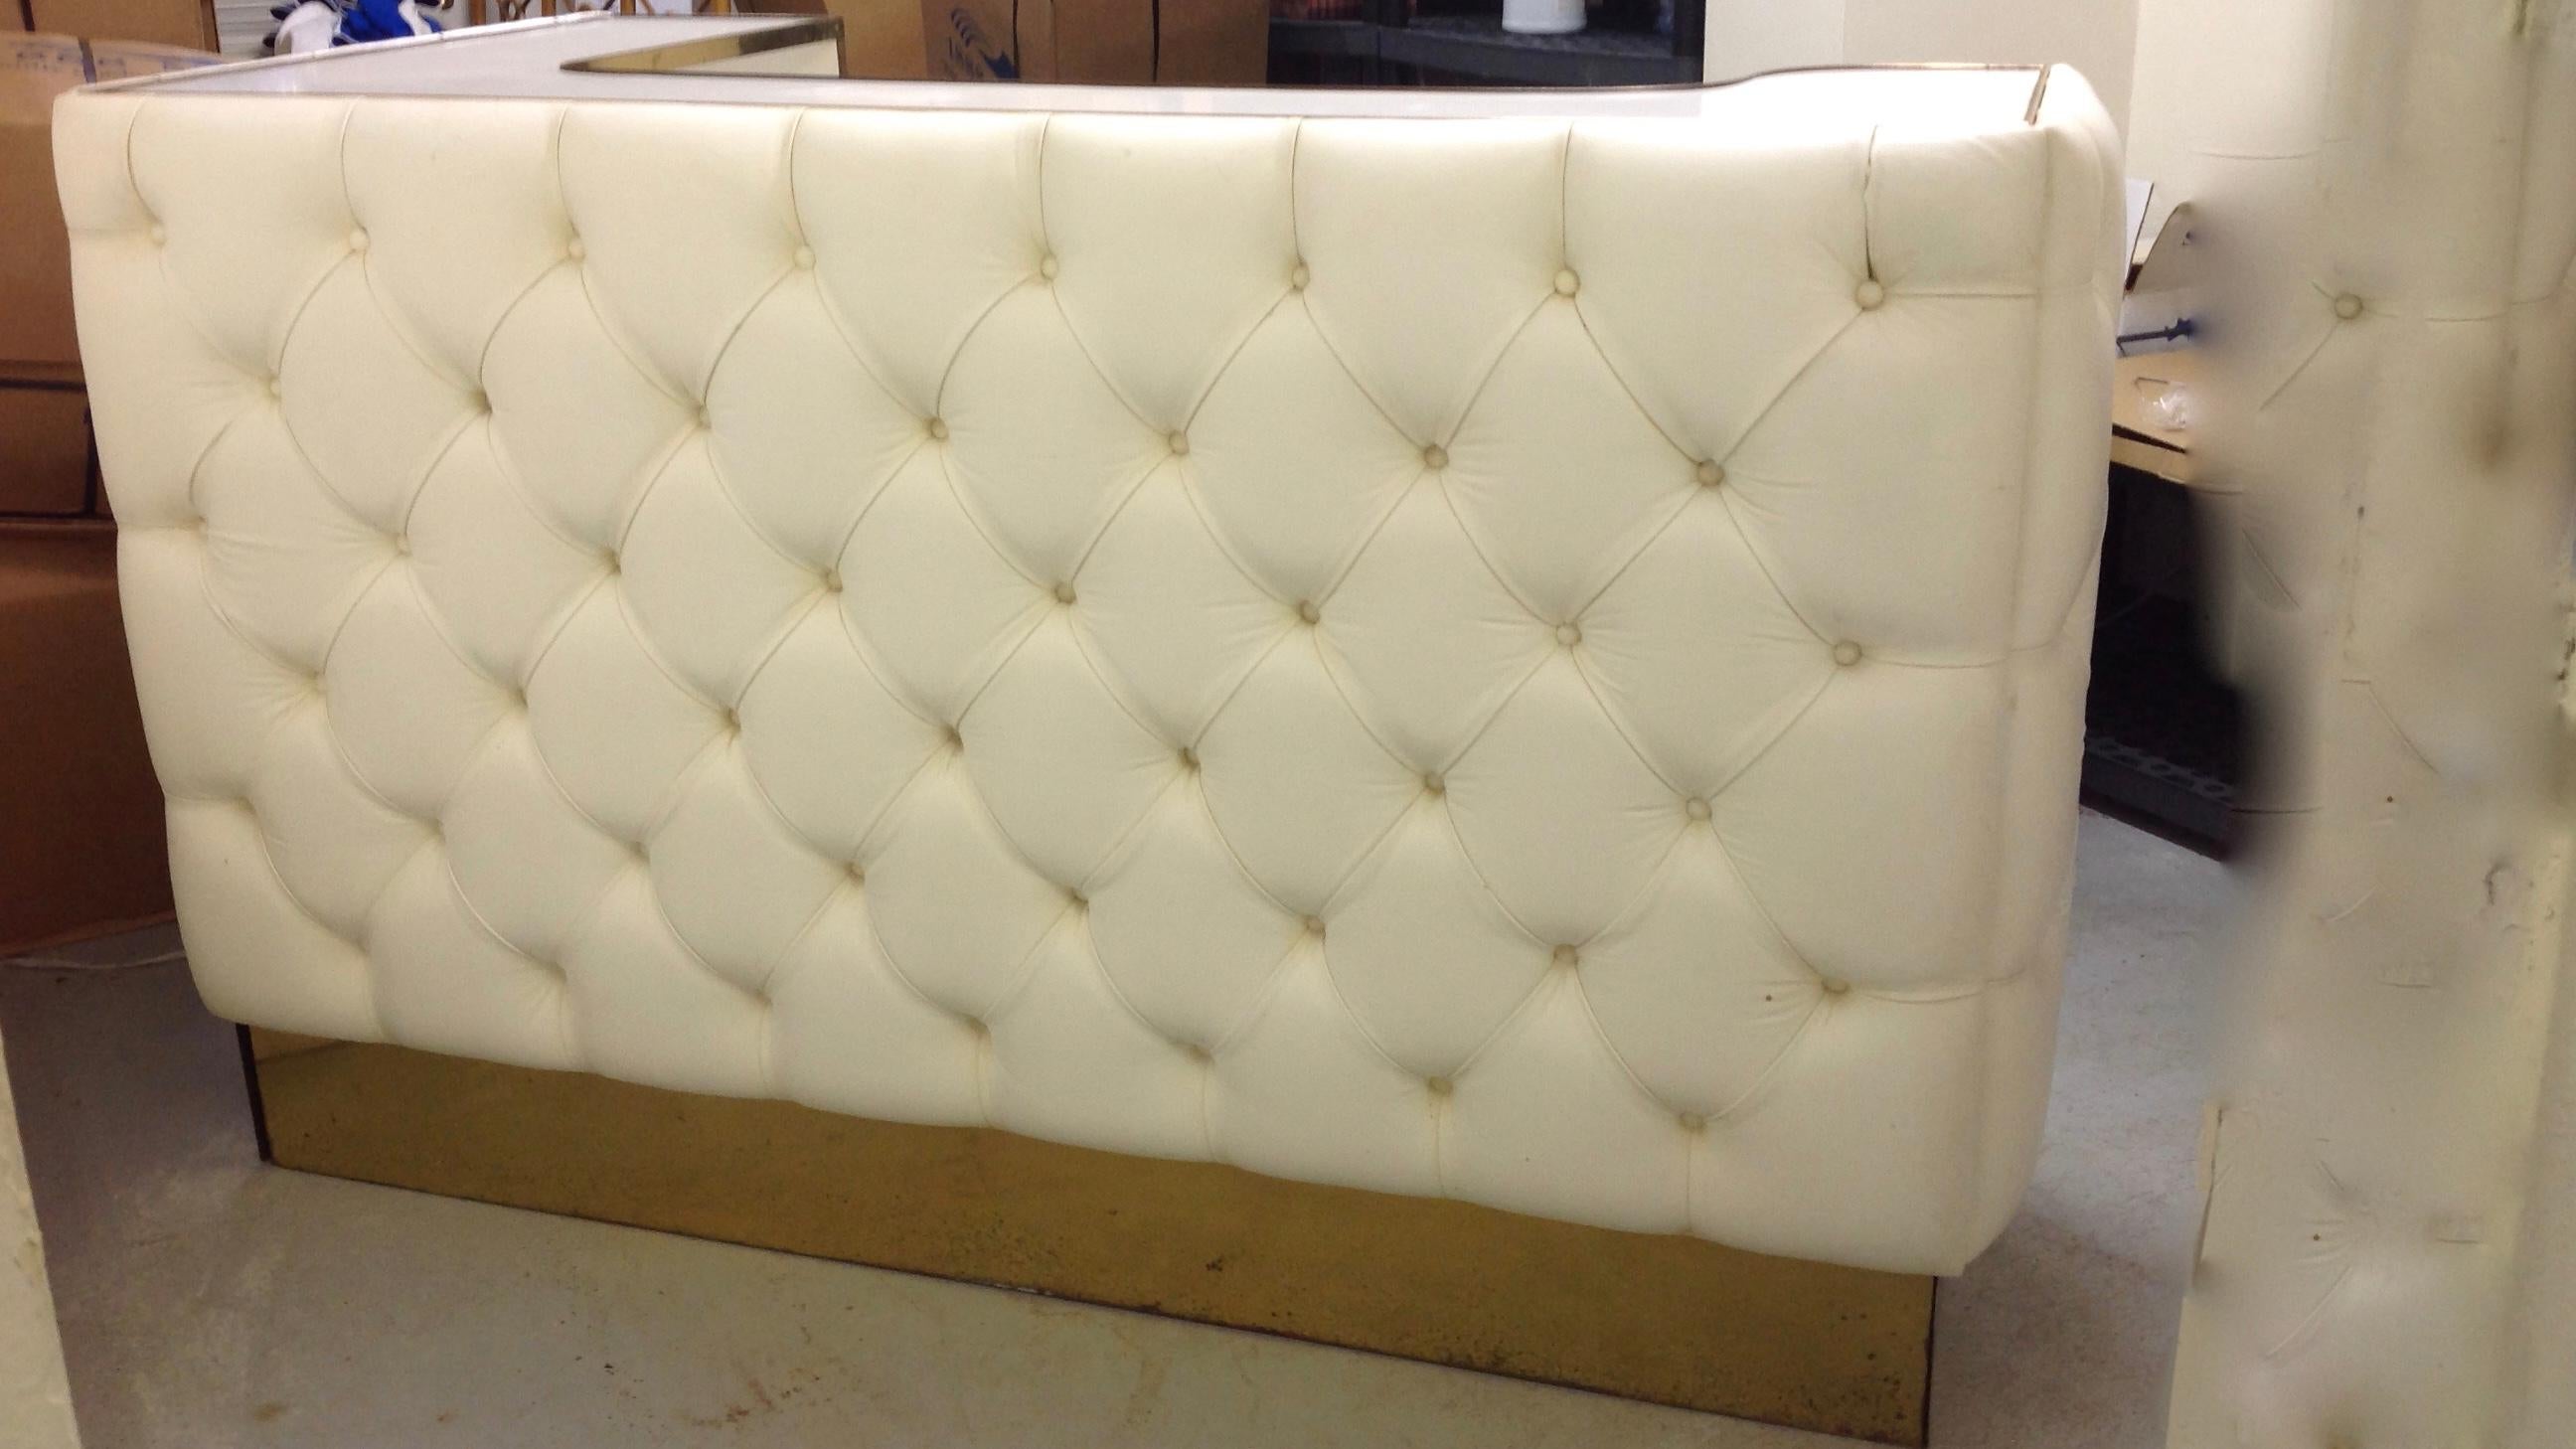 One of a kind with plush tufted leather front panels.
The bar is generously scaled and fitted with interior shelving for glass ware and bottles. The
smaller side is 35